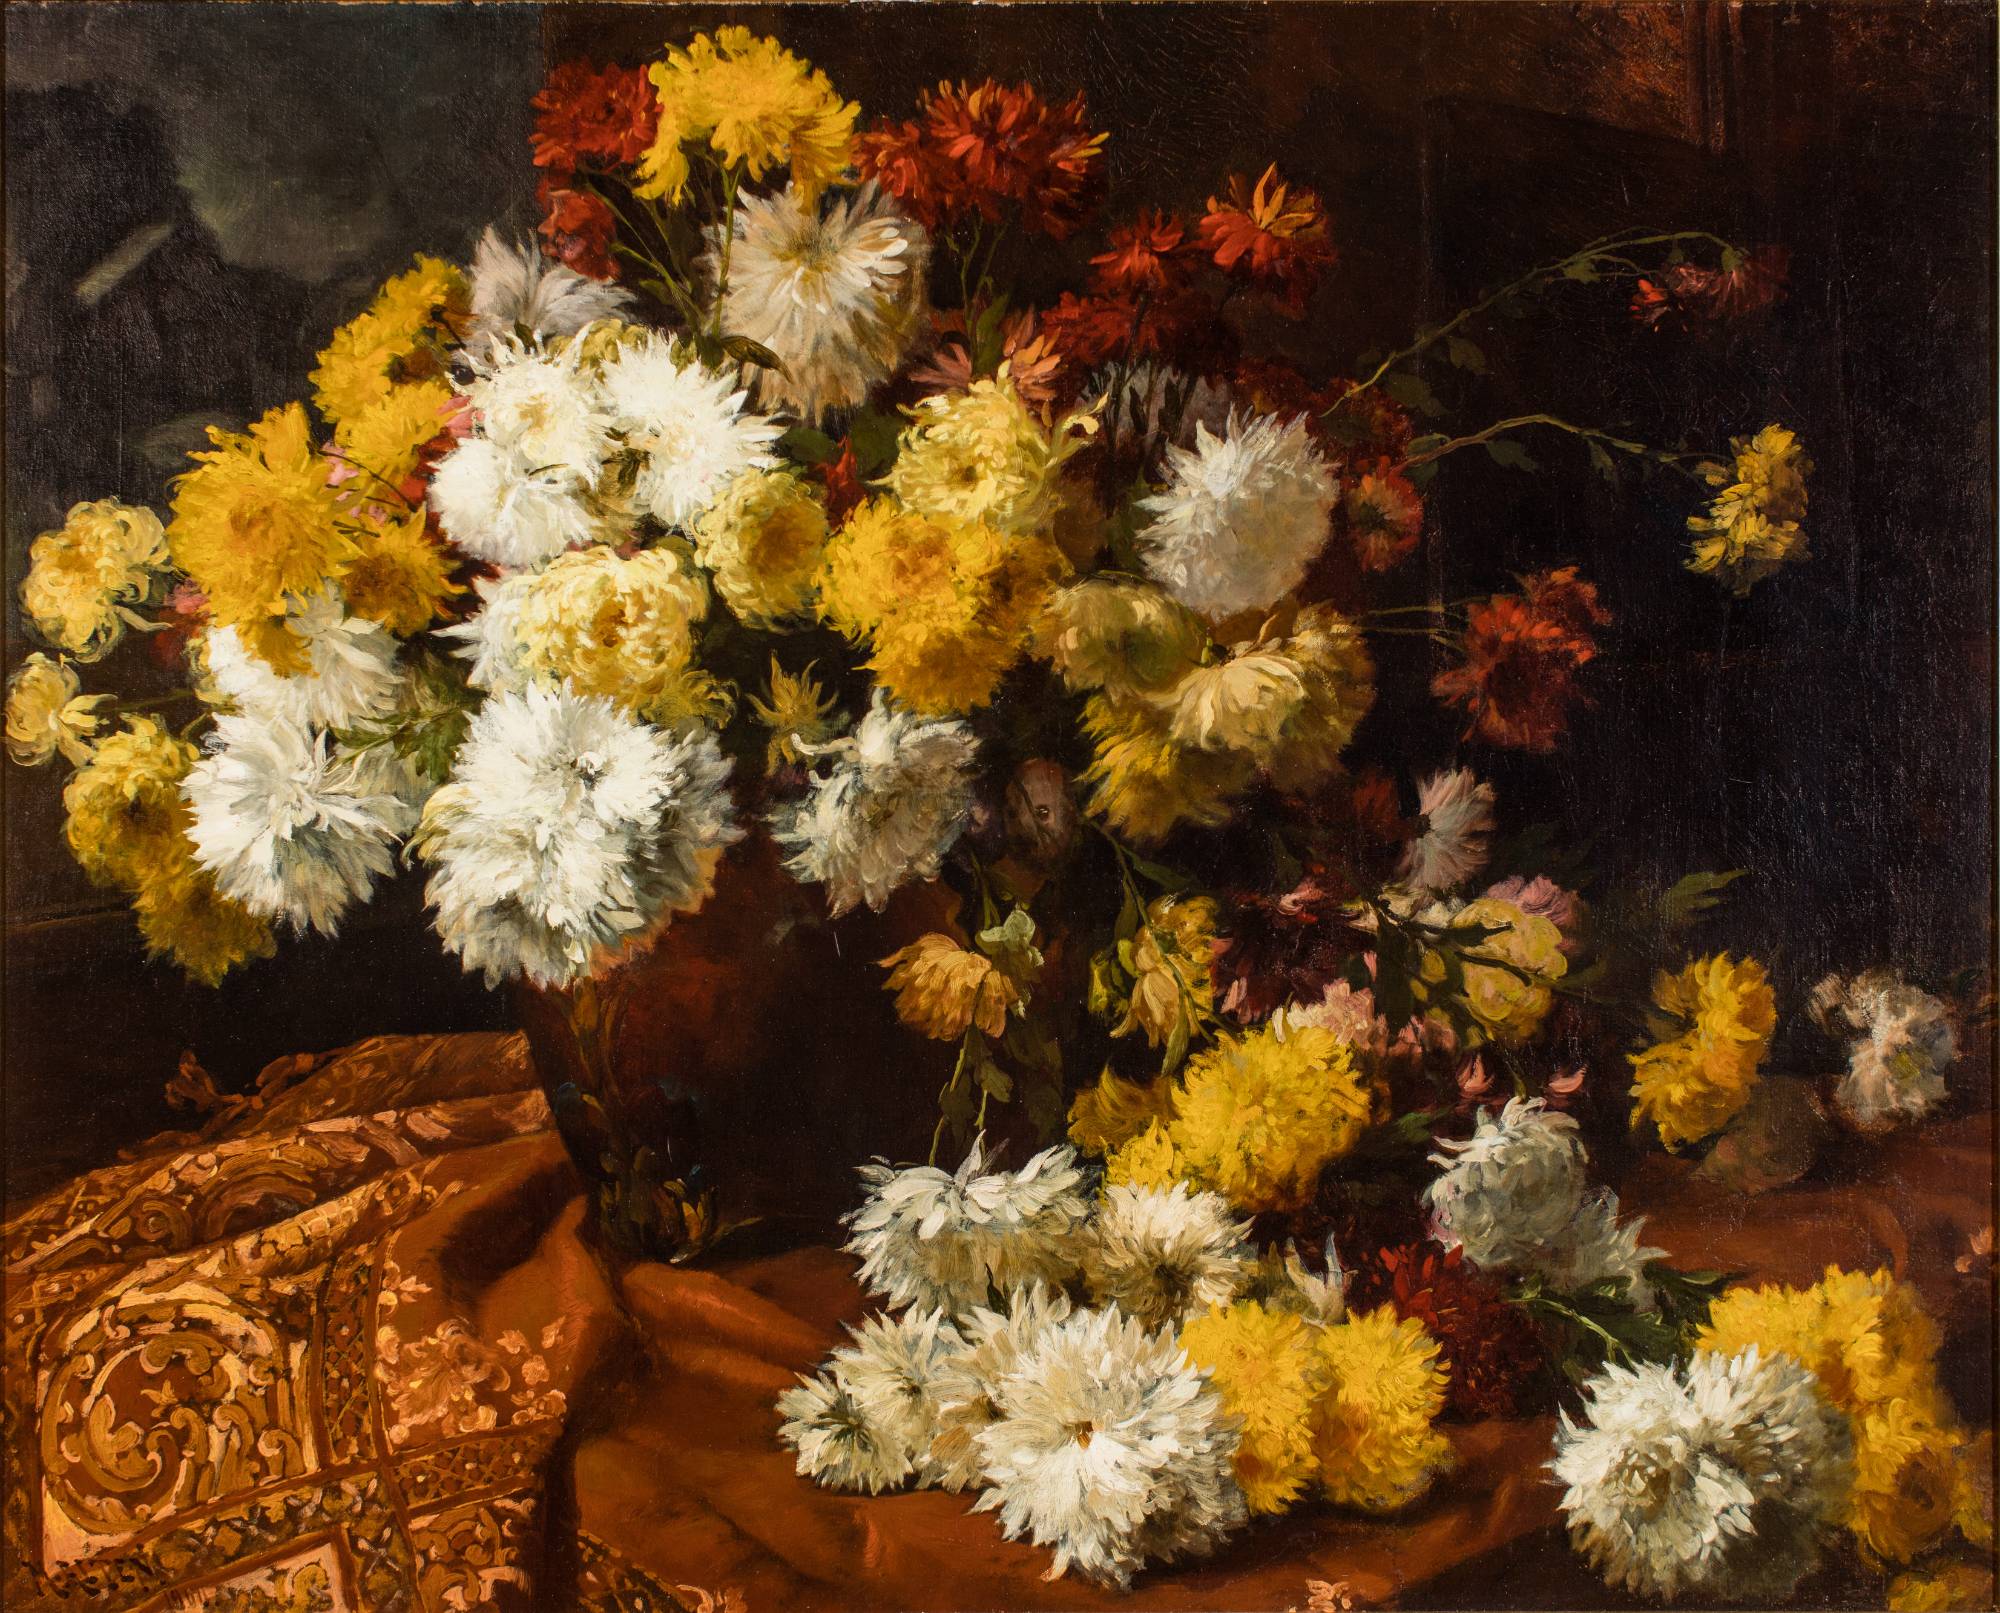 still life painting of Chrysanthemums against a dark background